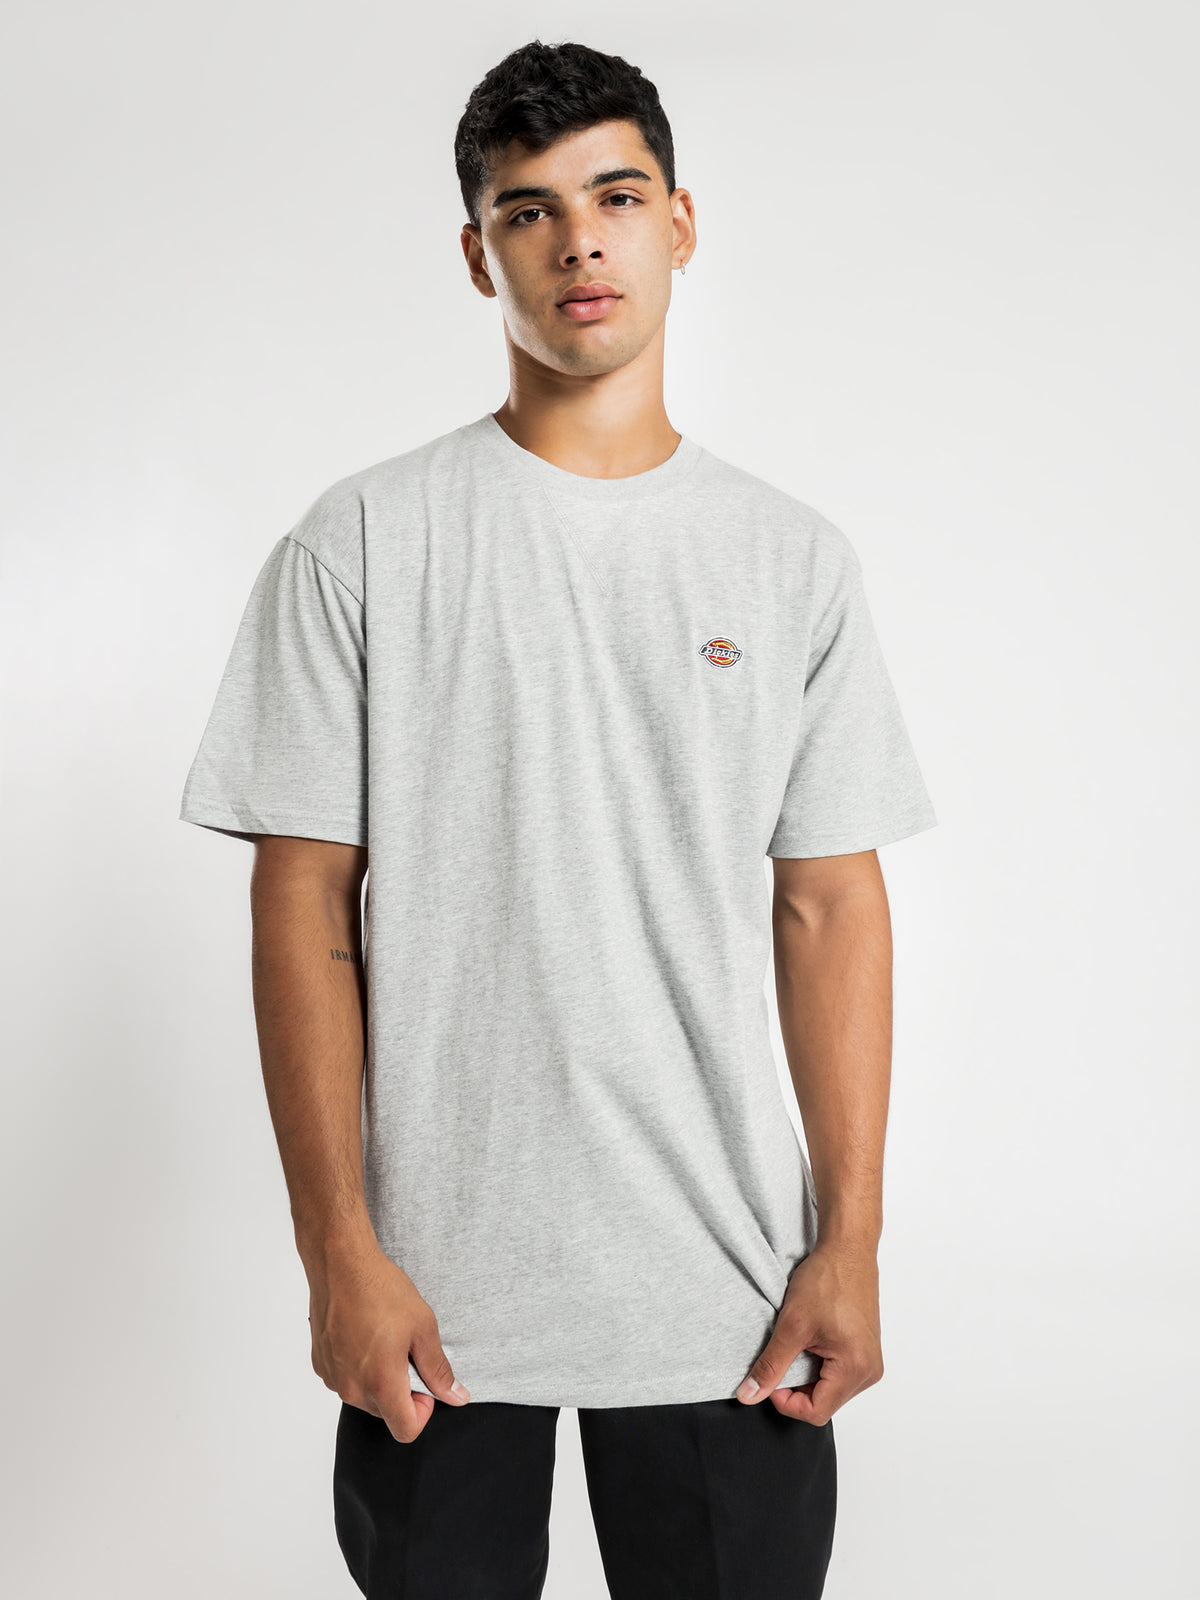 H.S Rockwood Classic Fit Short Sleeve T-Shirt in Grey Marle